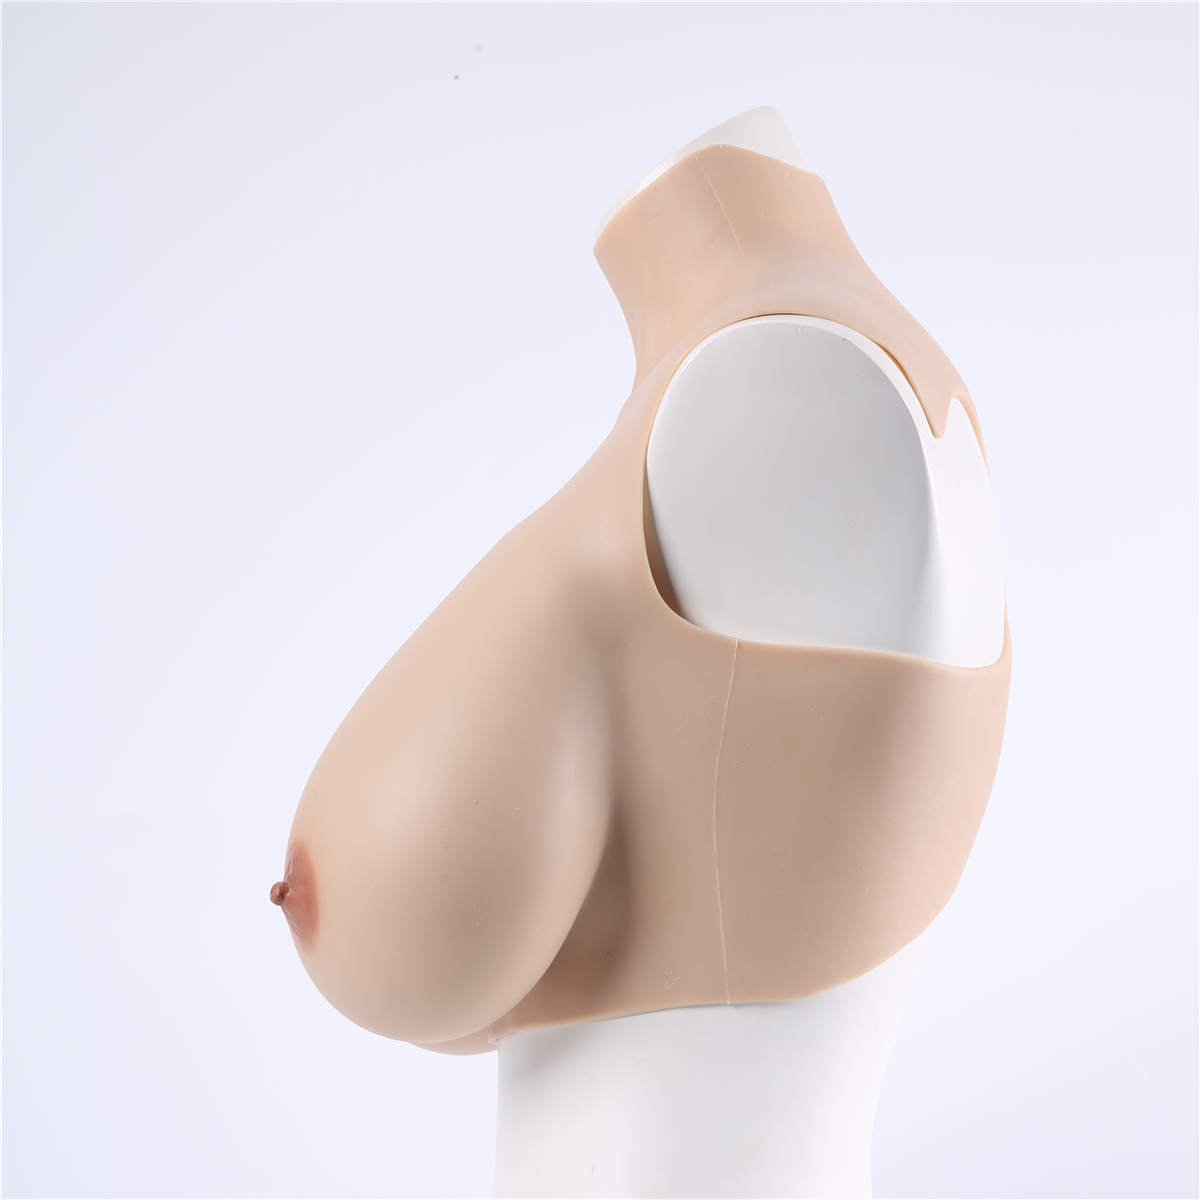 Cheap silicone i-cup breasts forms realistic